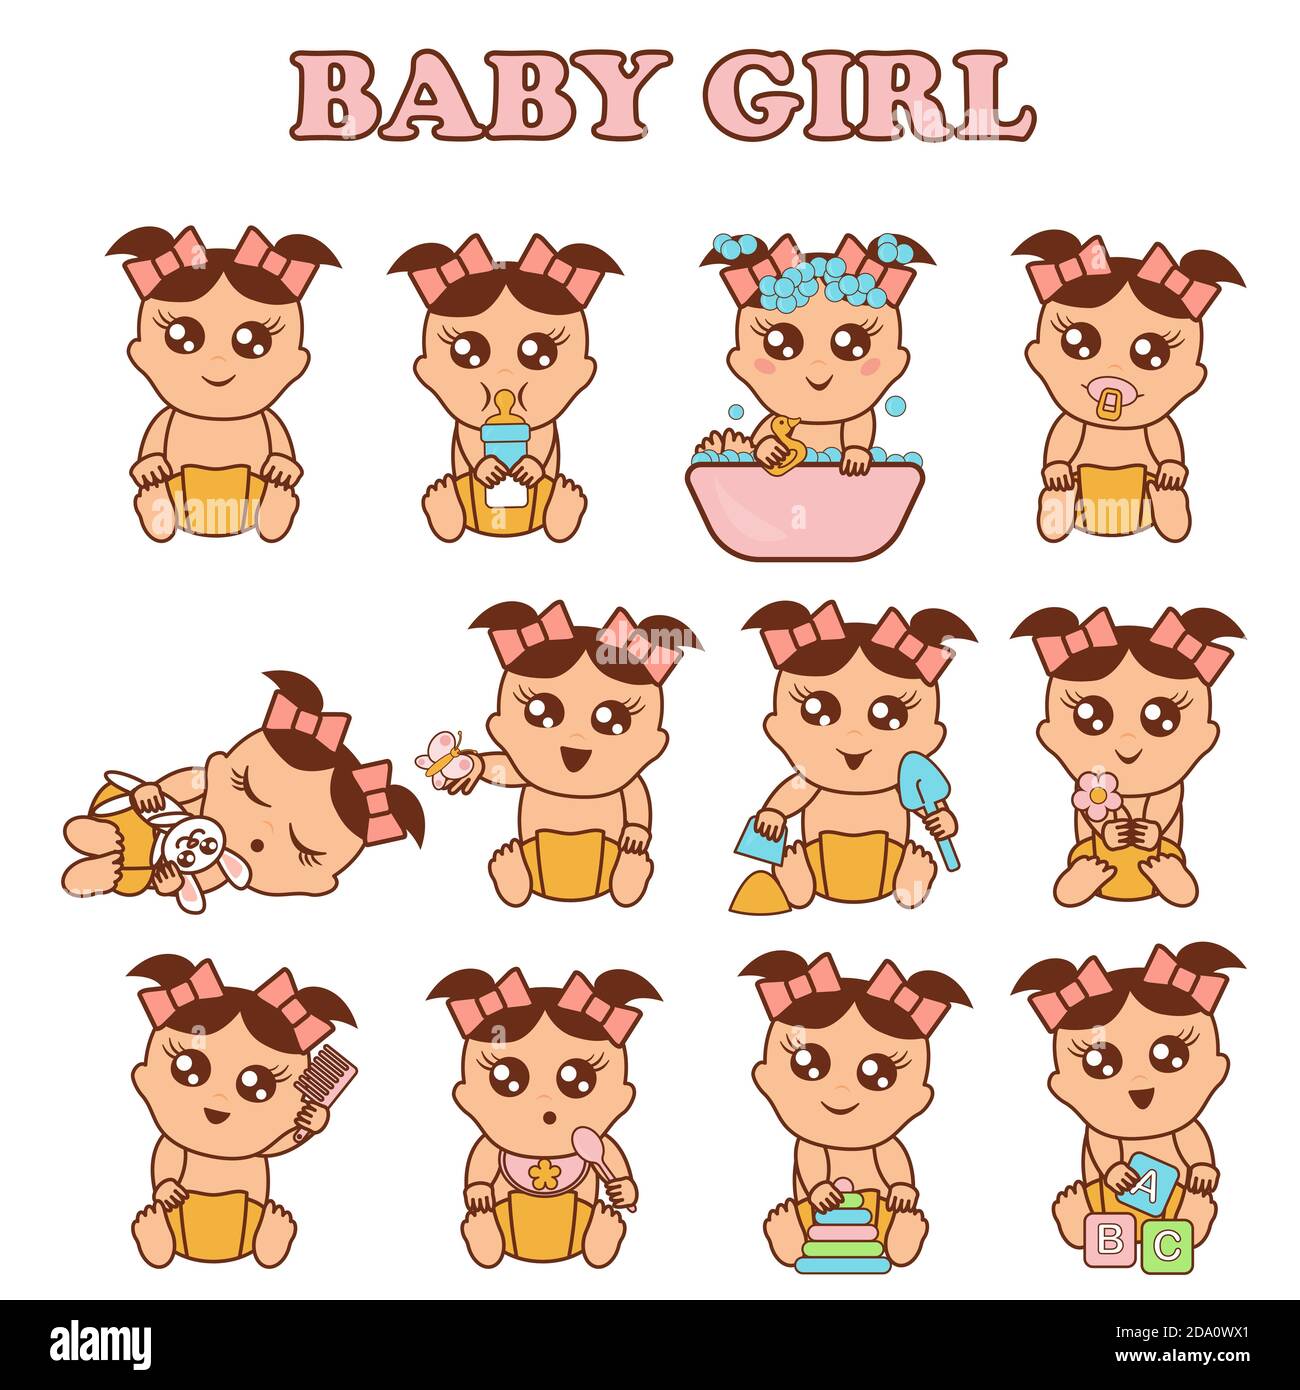 Baby girl set vector illustration. Cute girls in various poses and emotions in flat style. Stock Vector